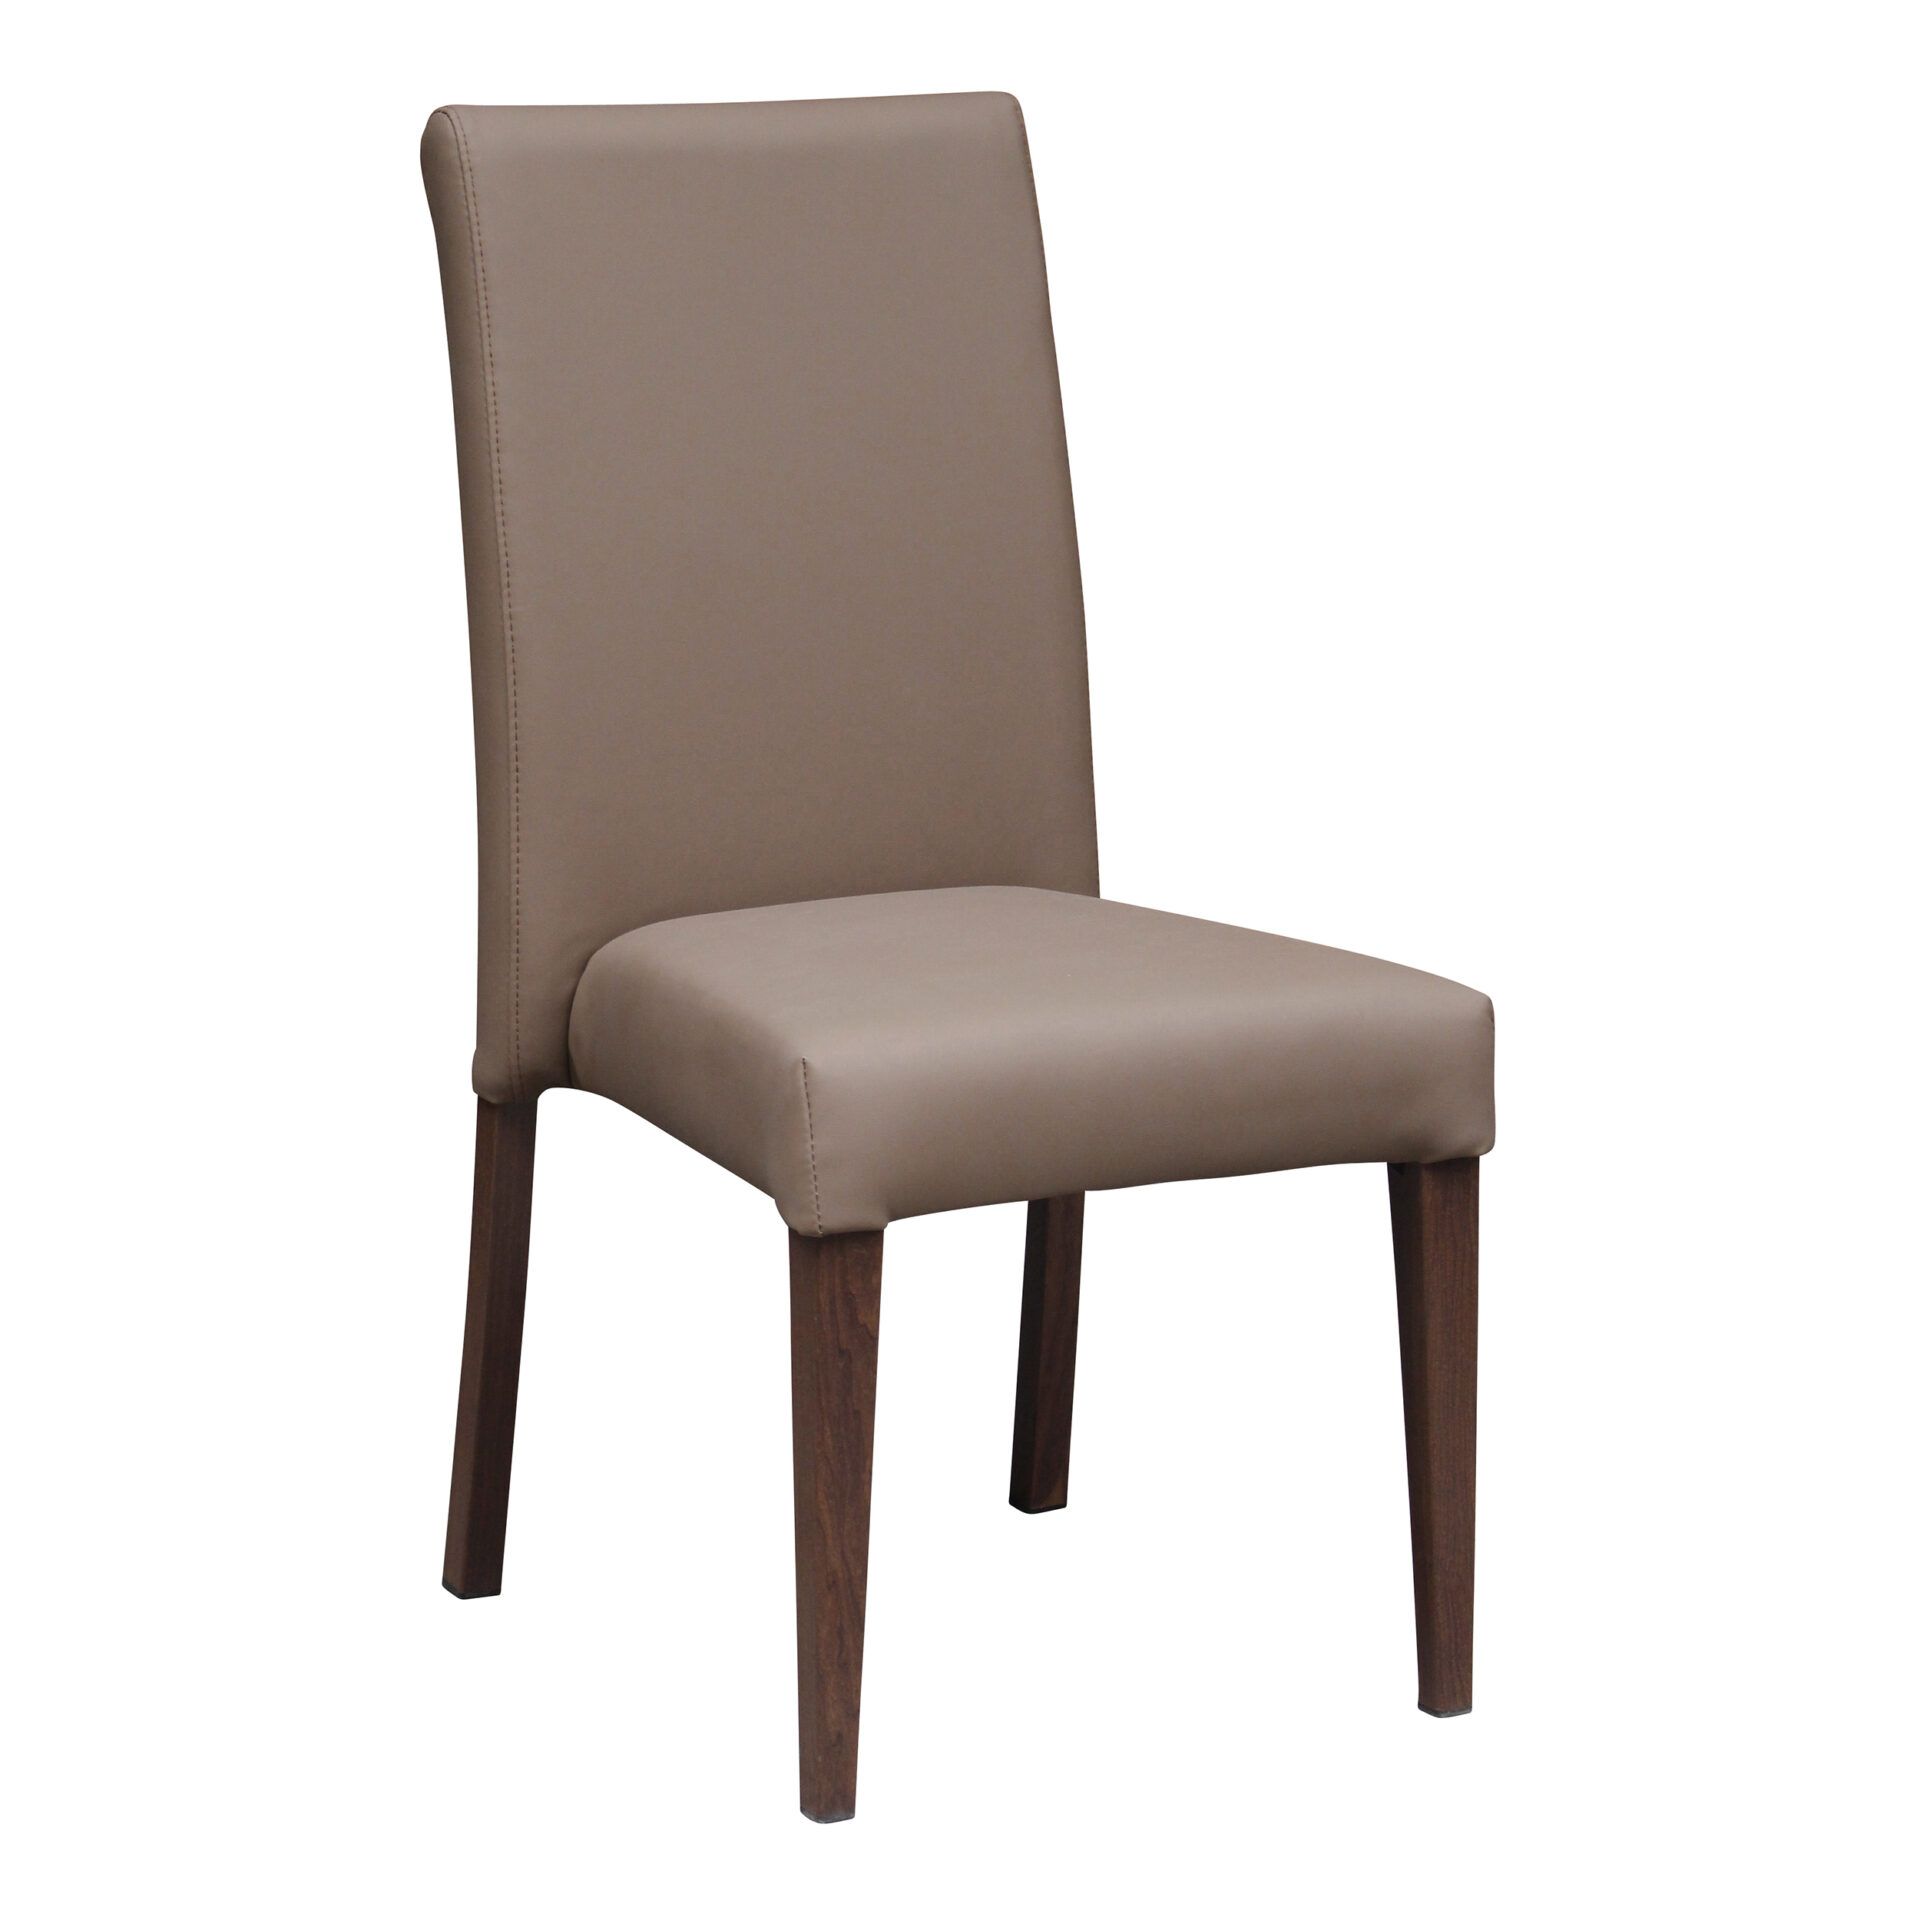 London Chair Taupe 3 1